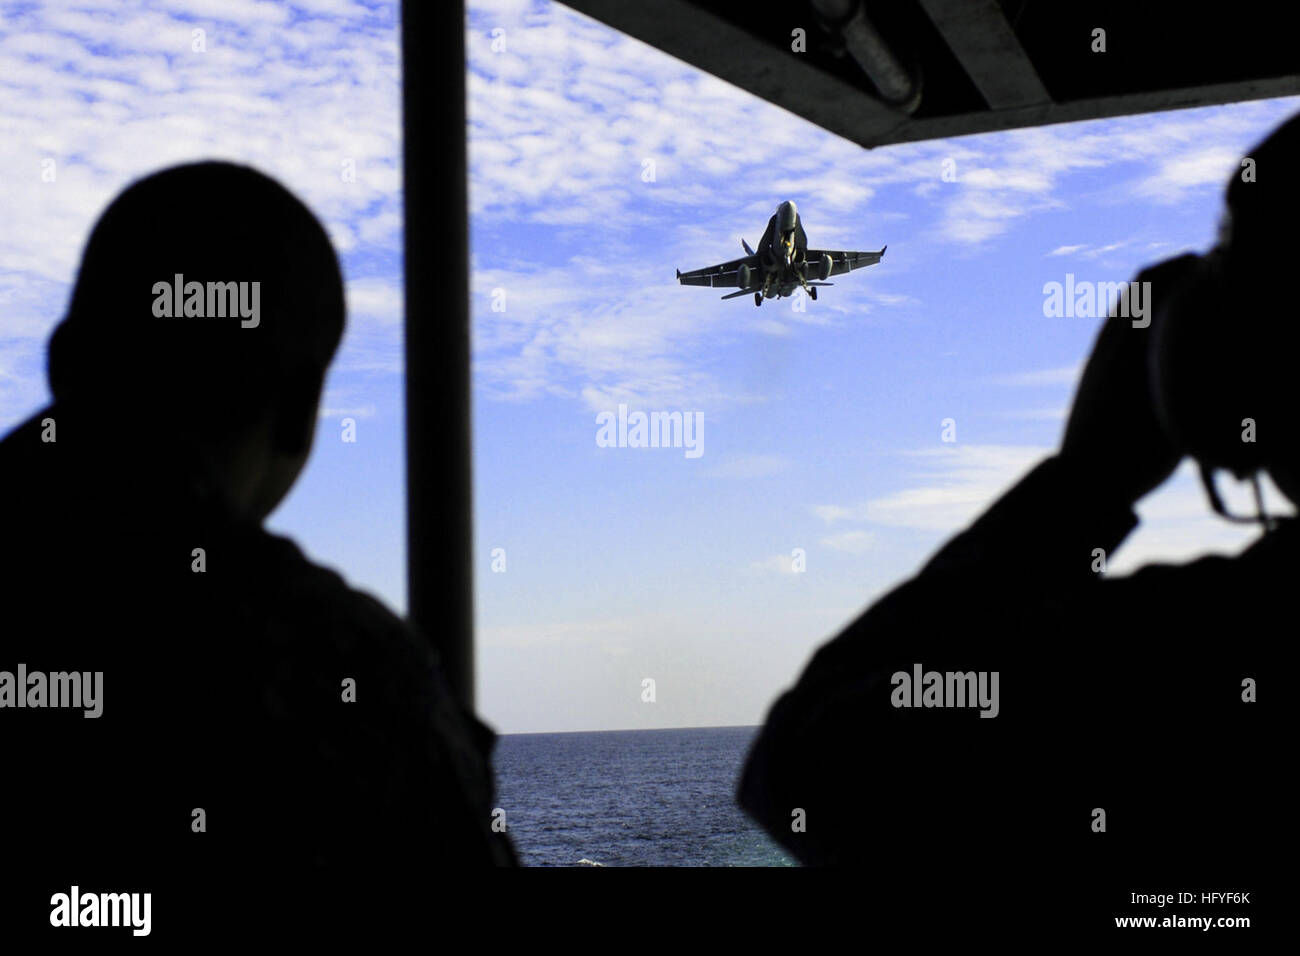 An F/A-18C Hornet from the Death Rattlers of Marine Strike Fighter Squadron 323 makes final adjustments to its approach above the flight deck of the nuclear-powered aircraft carrier USS Ronald Reagan.  Ronald Reagan is capable of landing one aircraft every minute on its 800-foot flight deck. Ronald Reagan and its embarked squadrons are currently underway conducting carrier qualifications in preparation for an upcoming deployment. (U.S. Navy photo/Petty Officer 3nd Class Alexander Tidd) USS Ronald Reagan DVIDS331884 Stock Photo